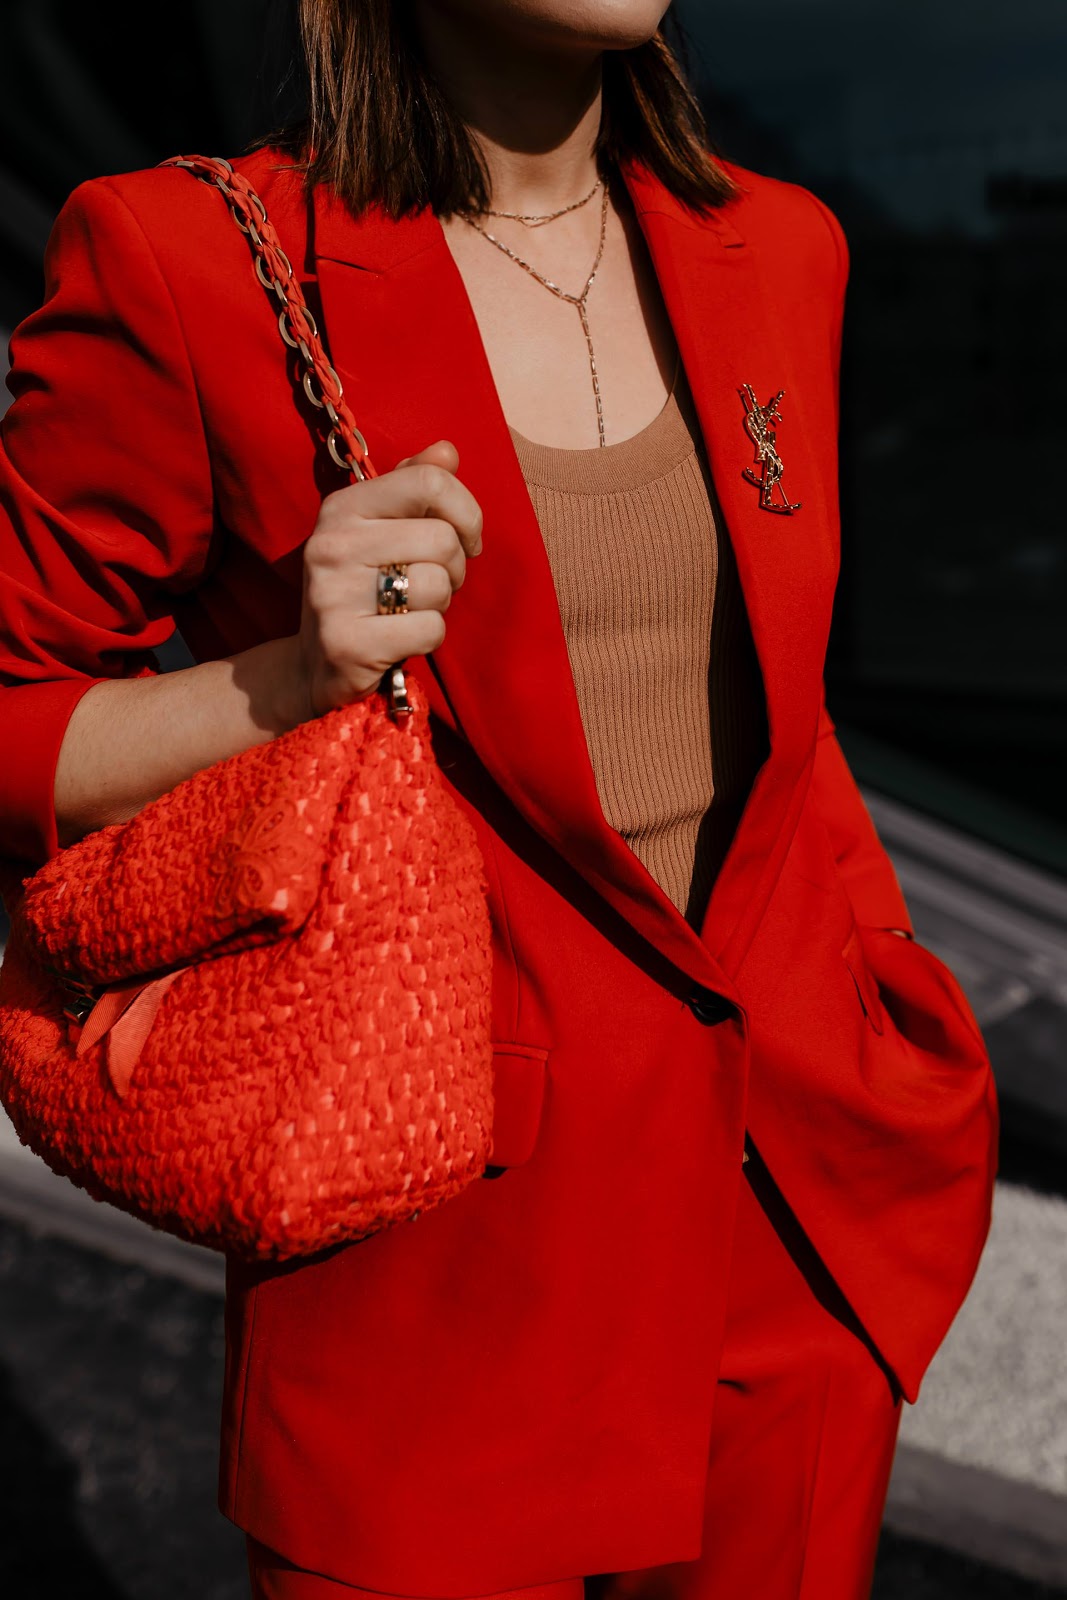 Red Spring Fashion Styles For Women - Fashion Inspiration | Cool Chic ...